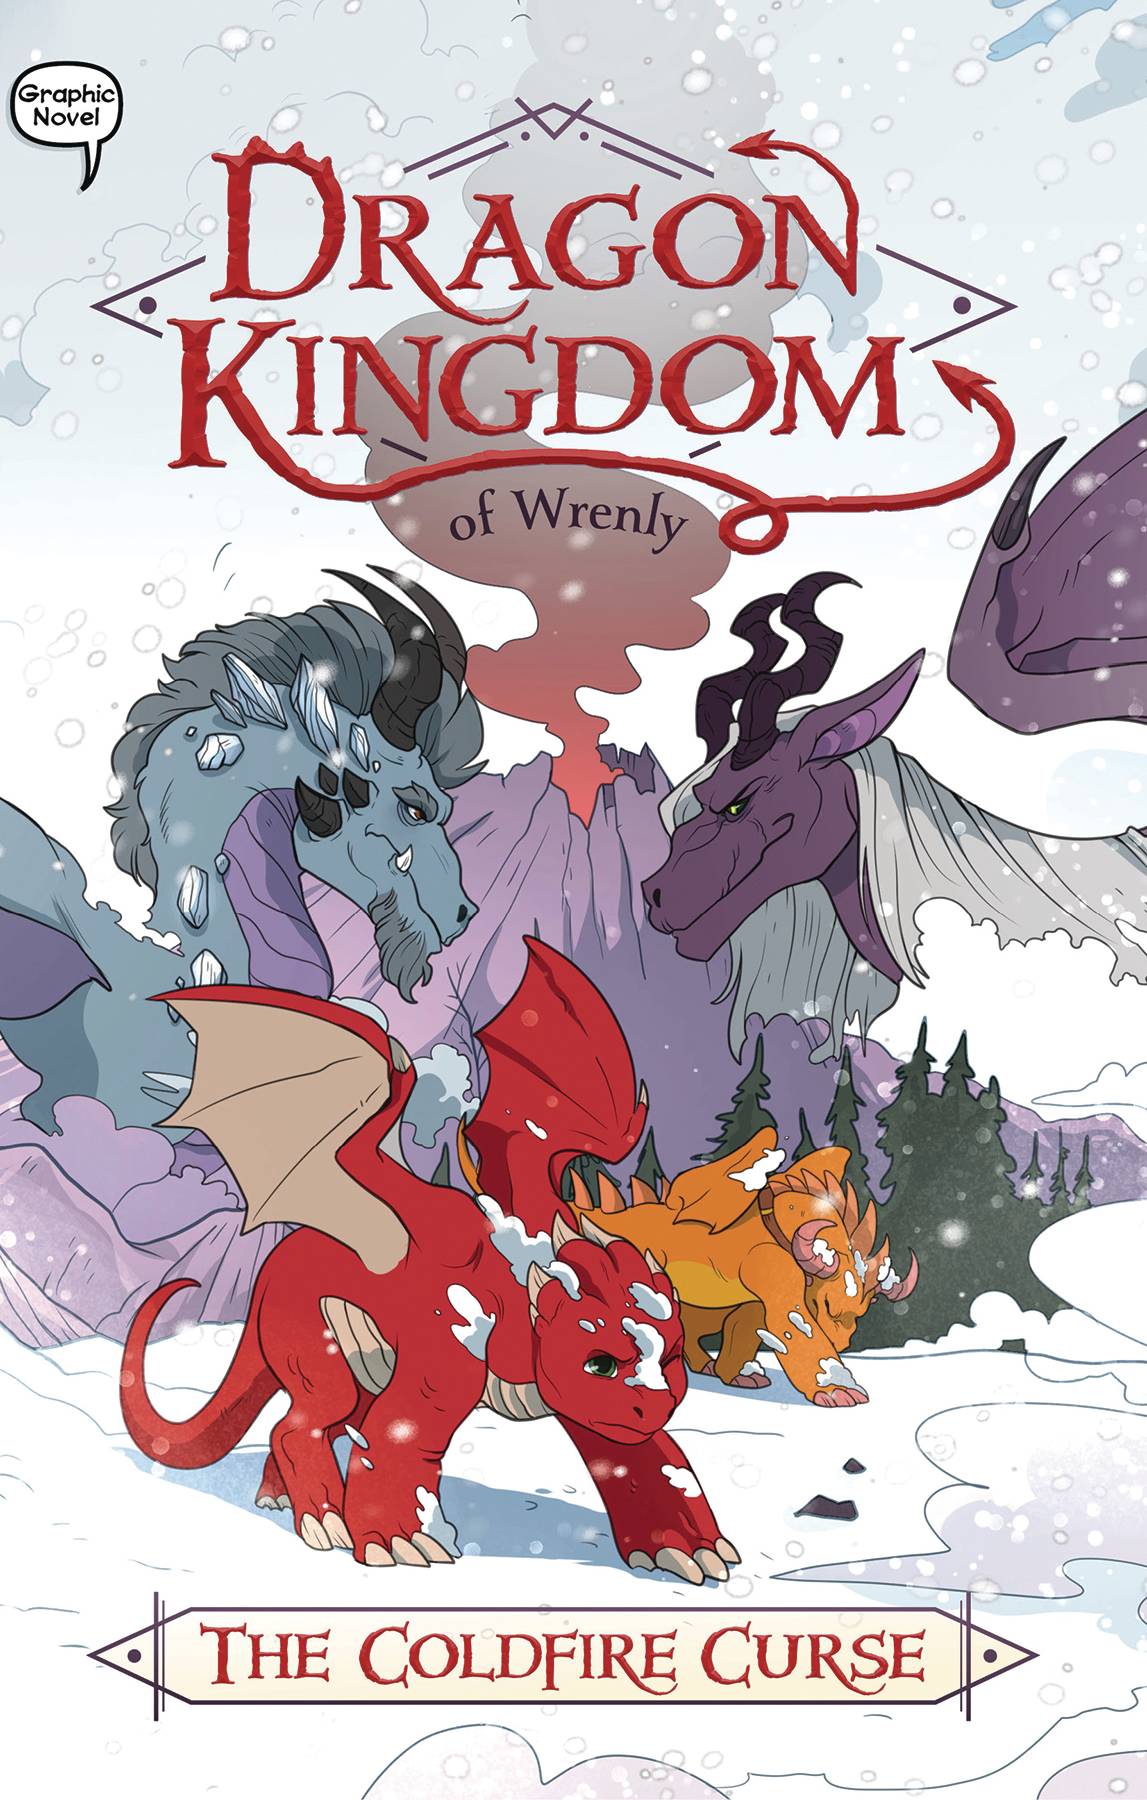 DRAGON KINGDOM OF WRENLY GN VOL 01 COLDFIRE CURSE